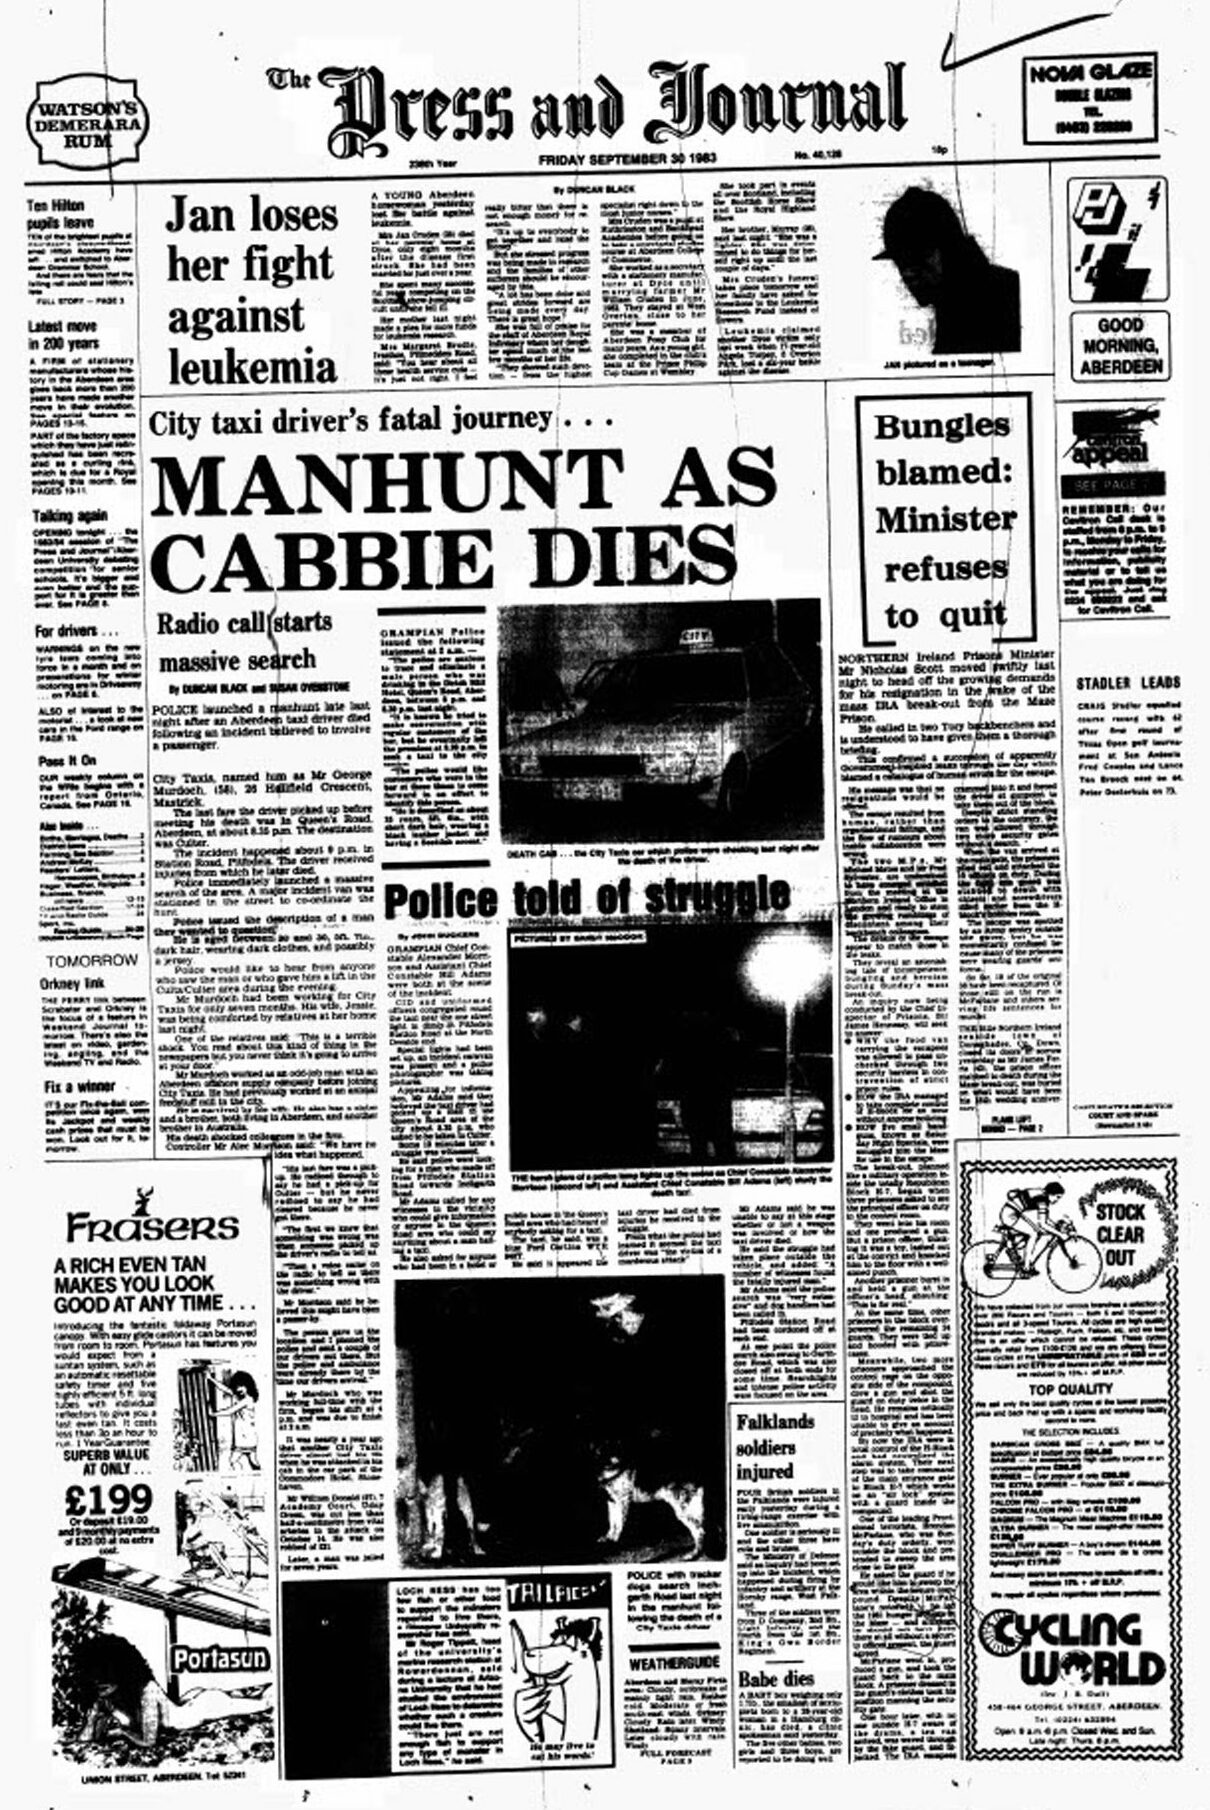 Front page of The Press and Journal with headline "Manhunt as cabbie dies".